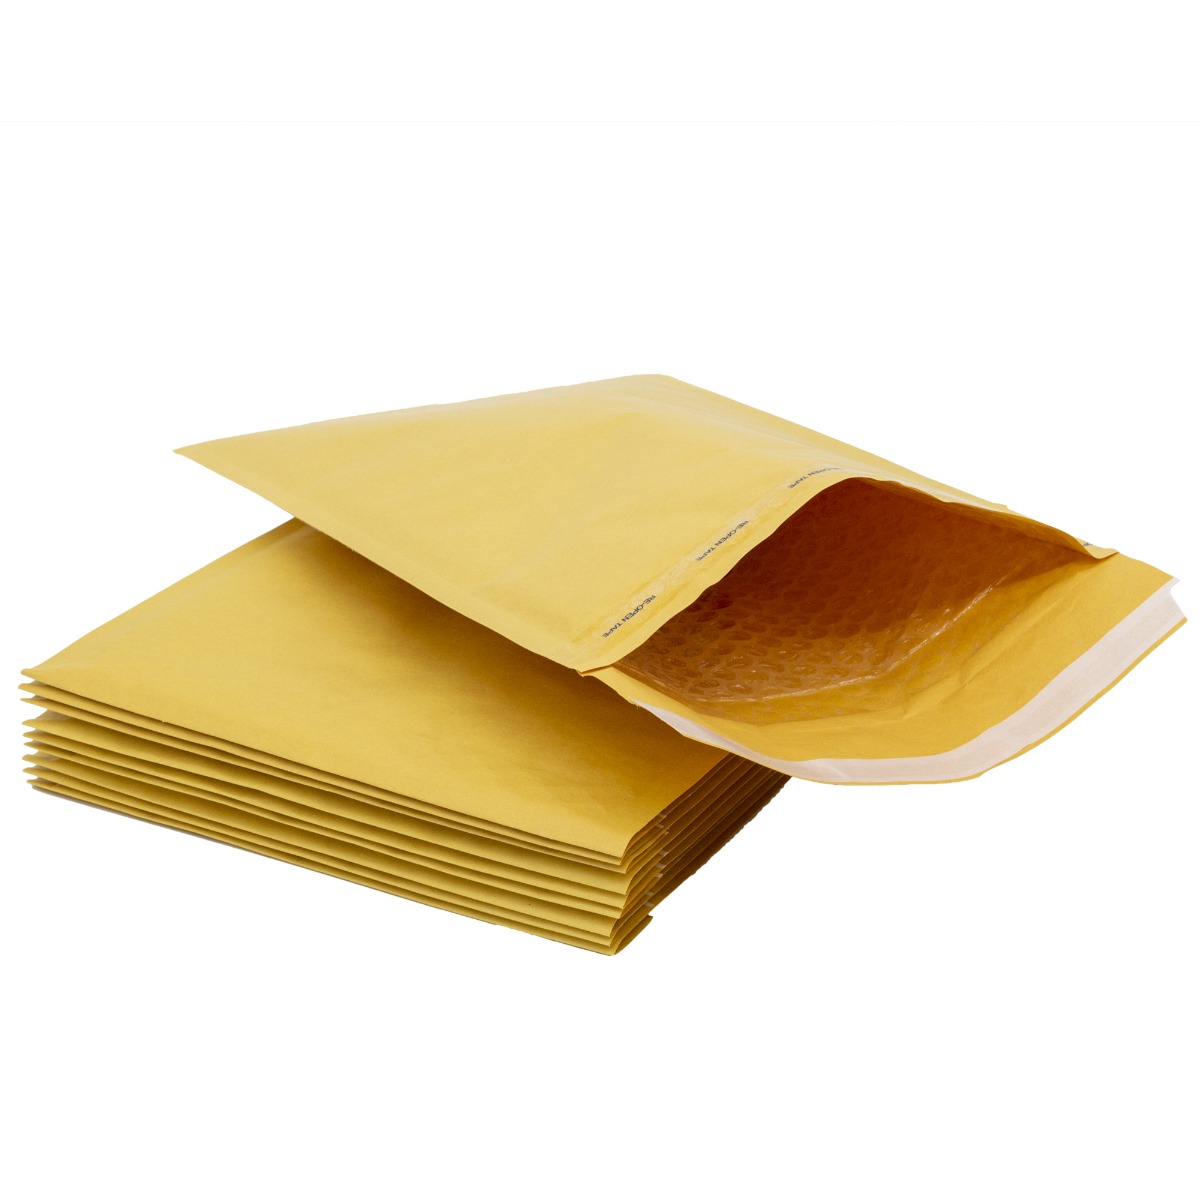 MIMA TRADING - Manilla Paper (Envelope Paper) 70 G.S.M AVAILABLE